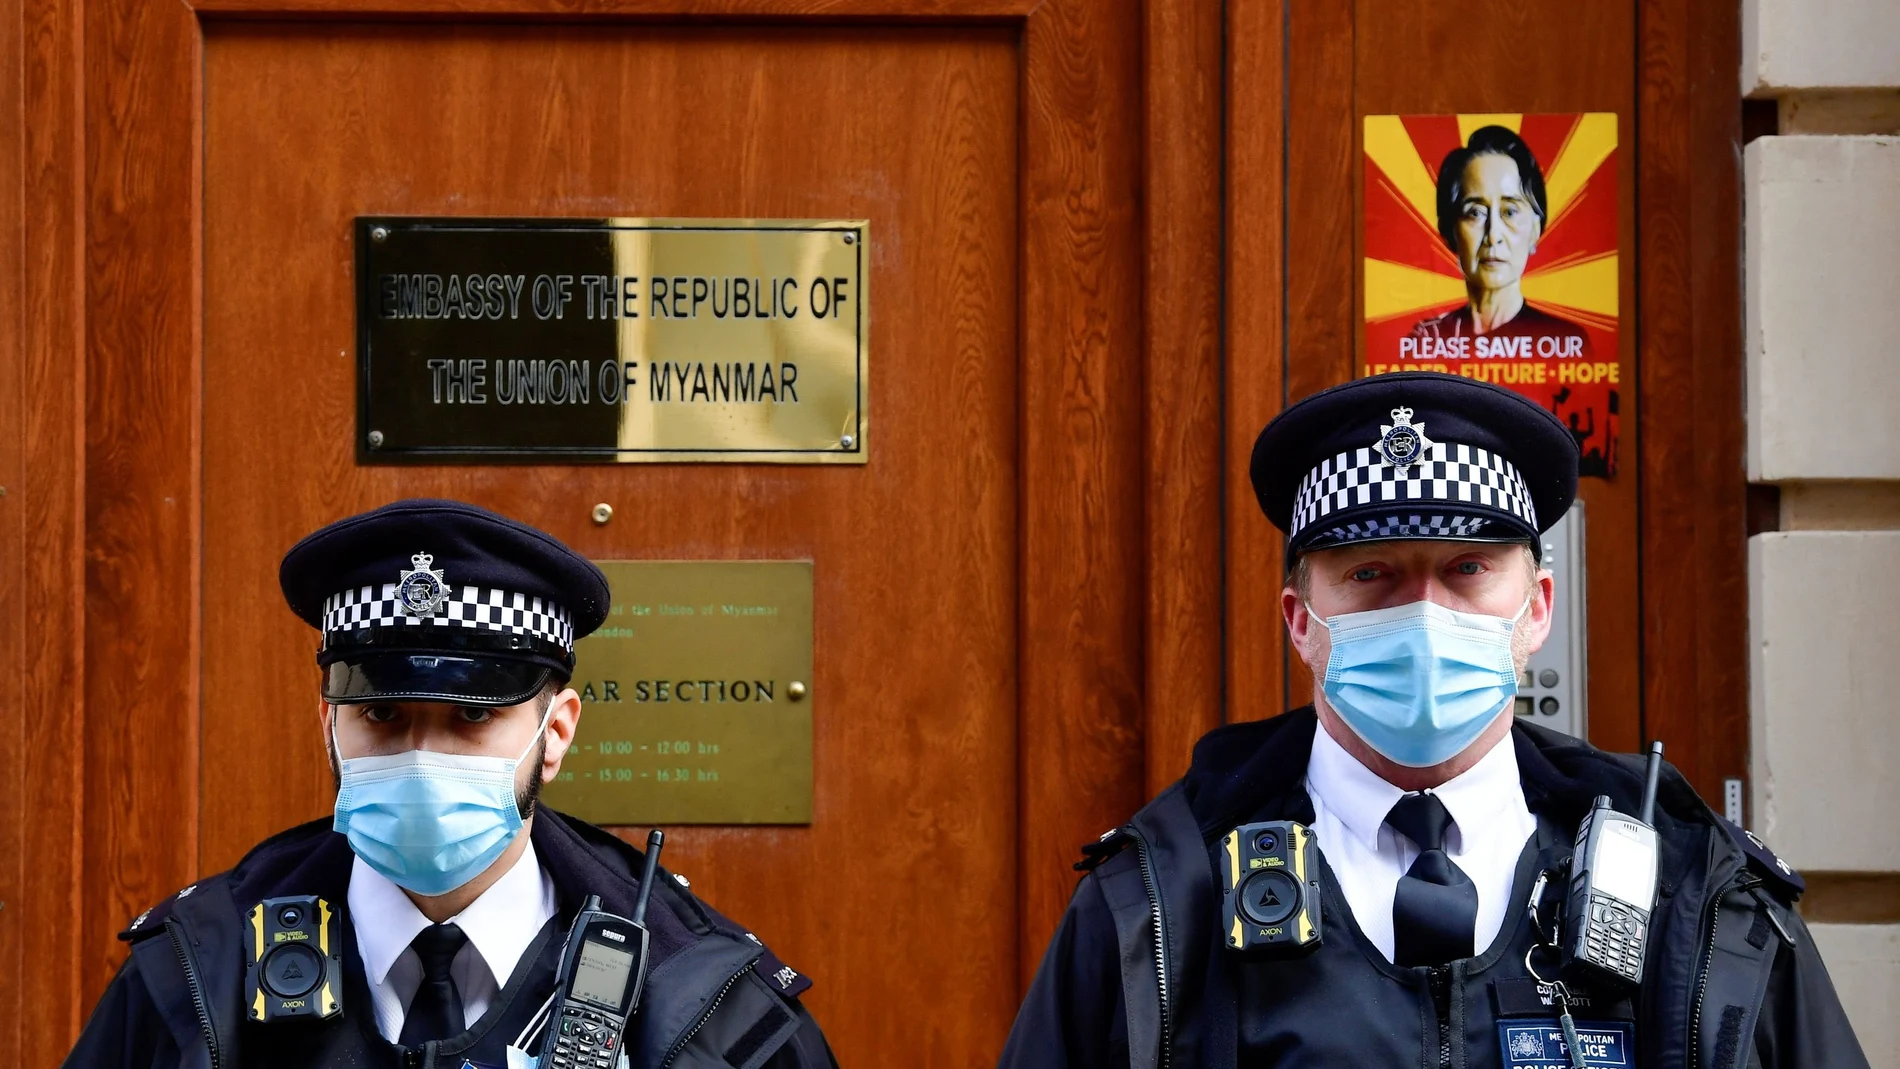 Police officers stand guard outside the Myanmar Embassy in London, Britain, April 8, 2021. REUTERS/Toby Melville